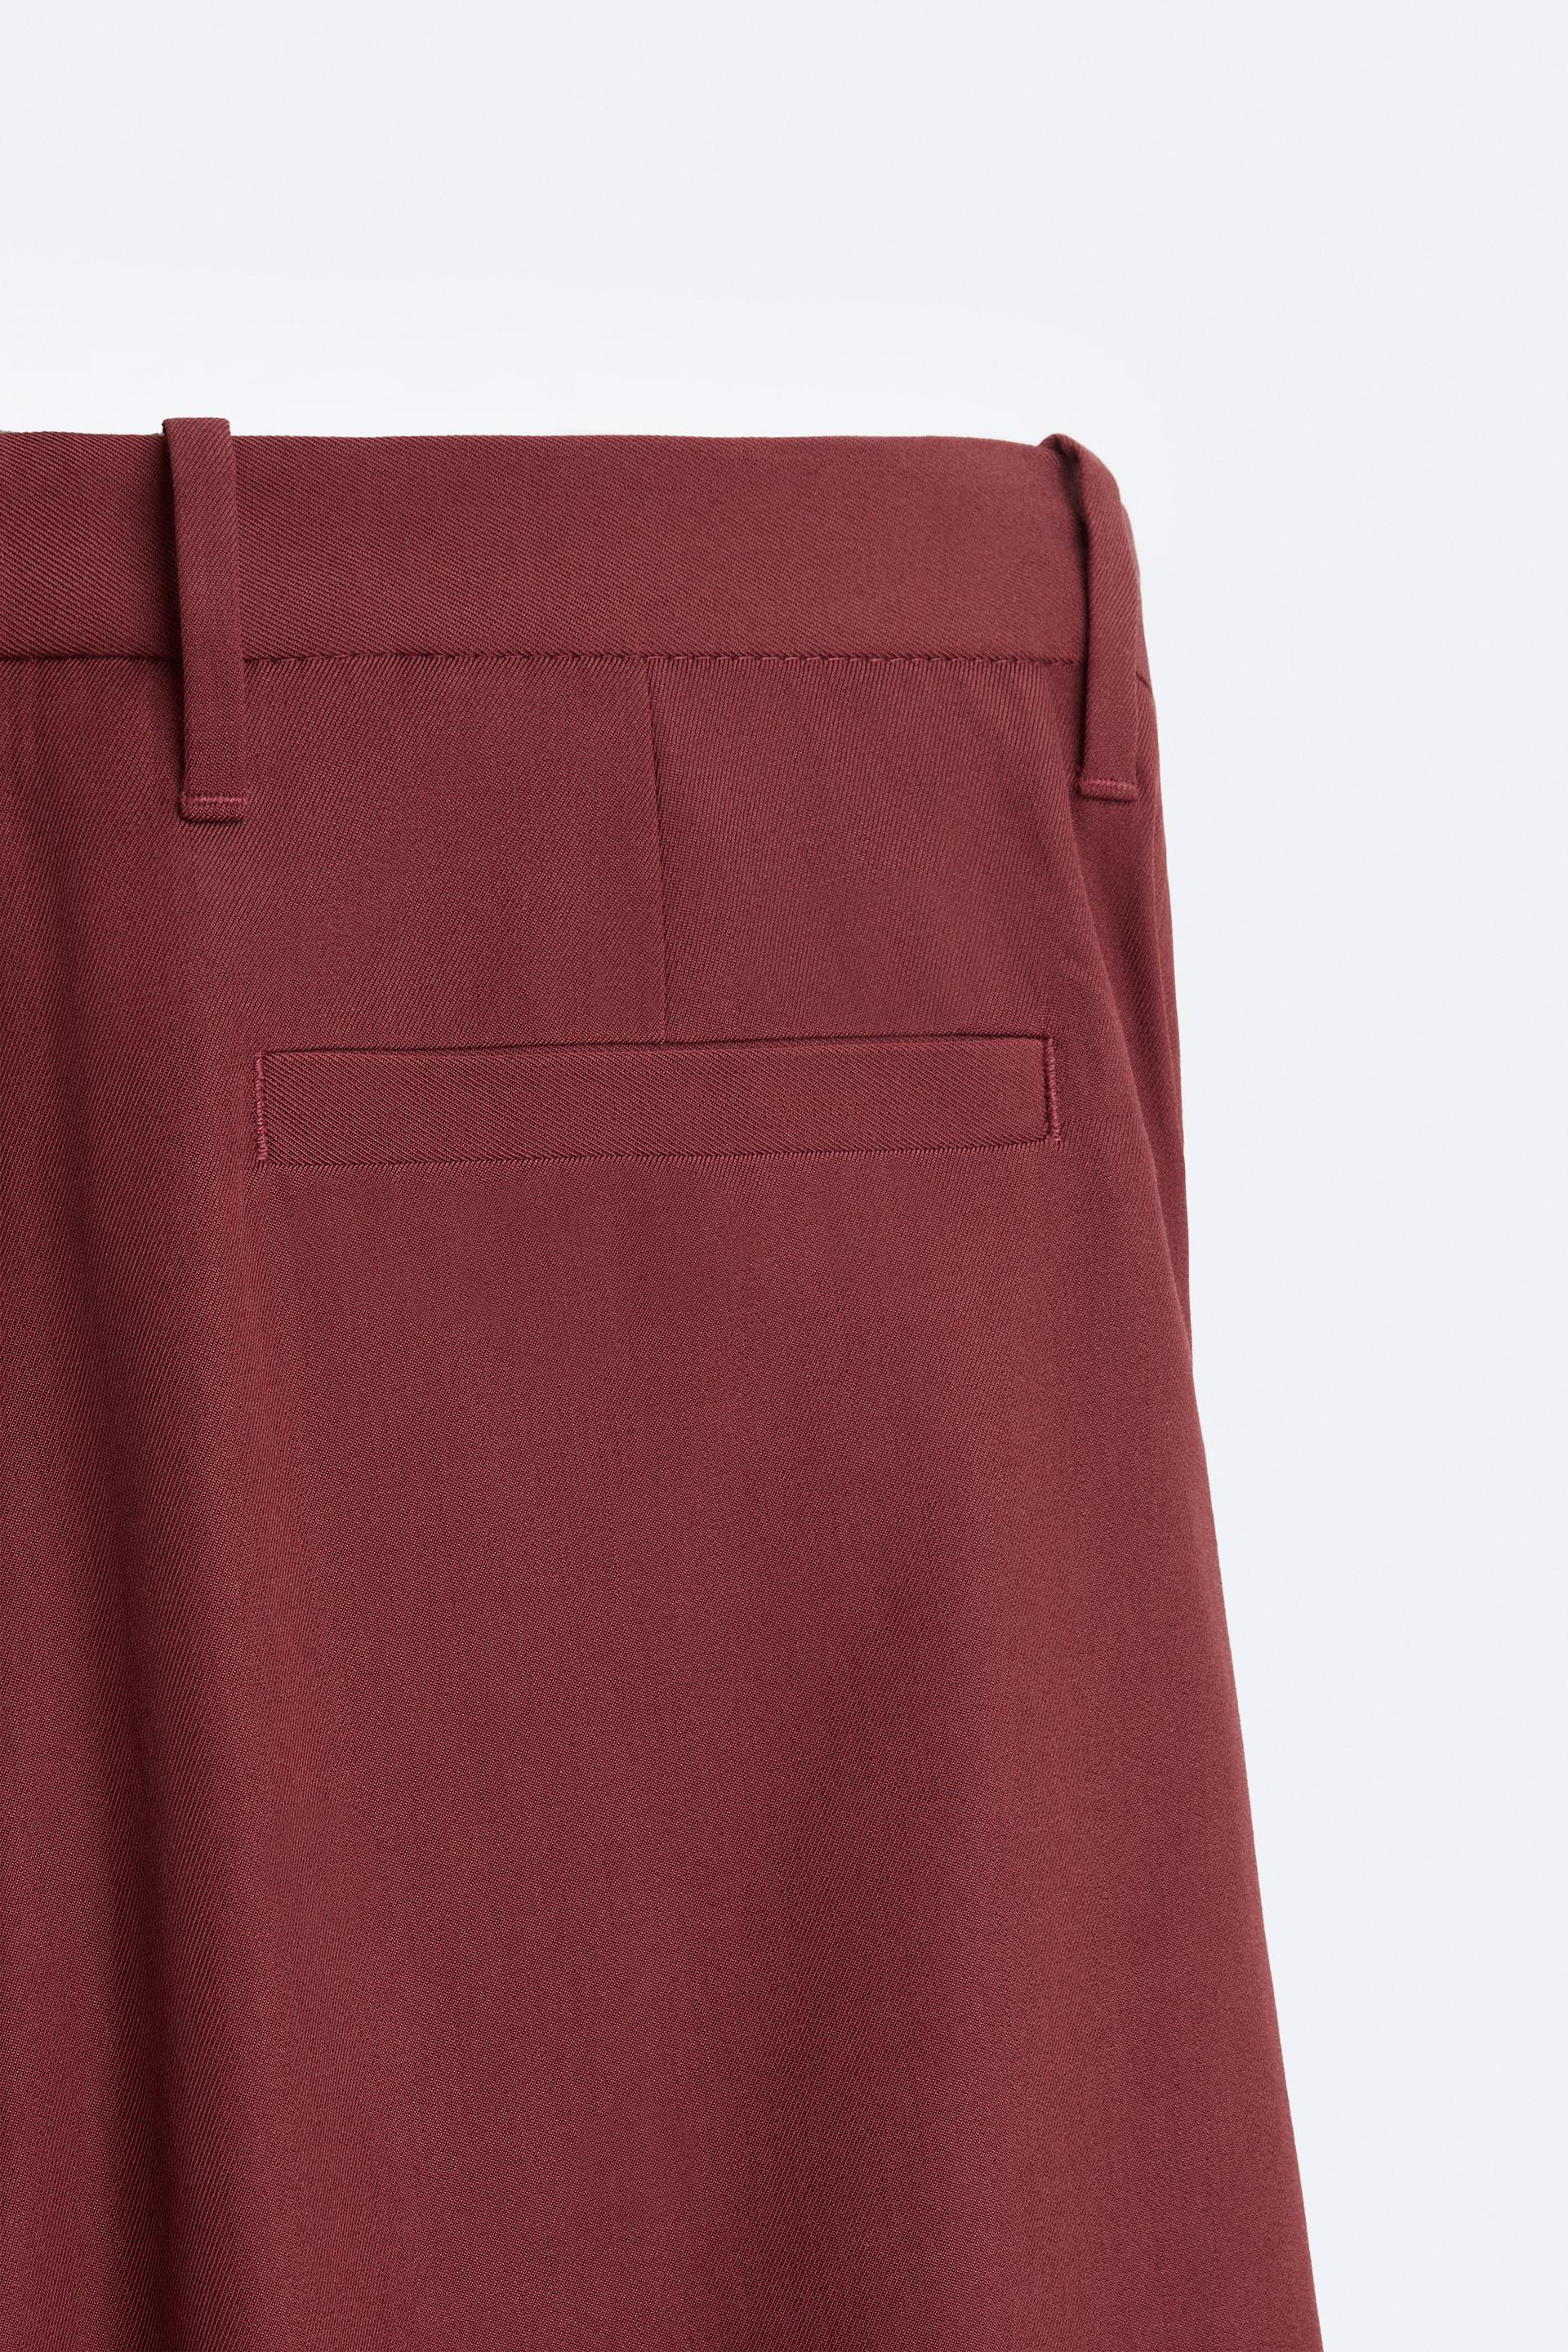 Pleated Pants: Zara Limited Edition Oversized Wool Blend Pants, The New  Zara Studio Collection Is a Fall Dream Come True